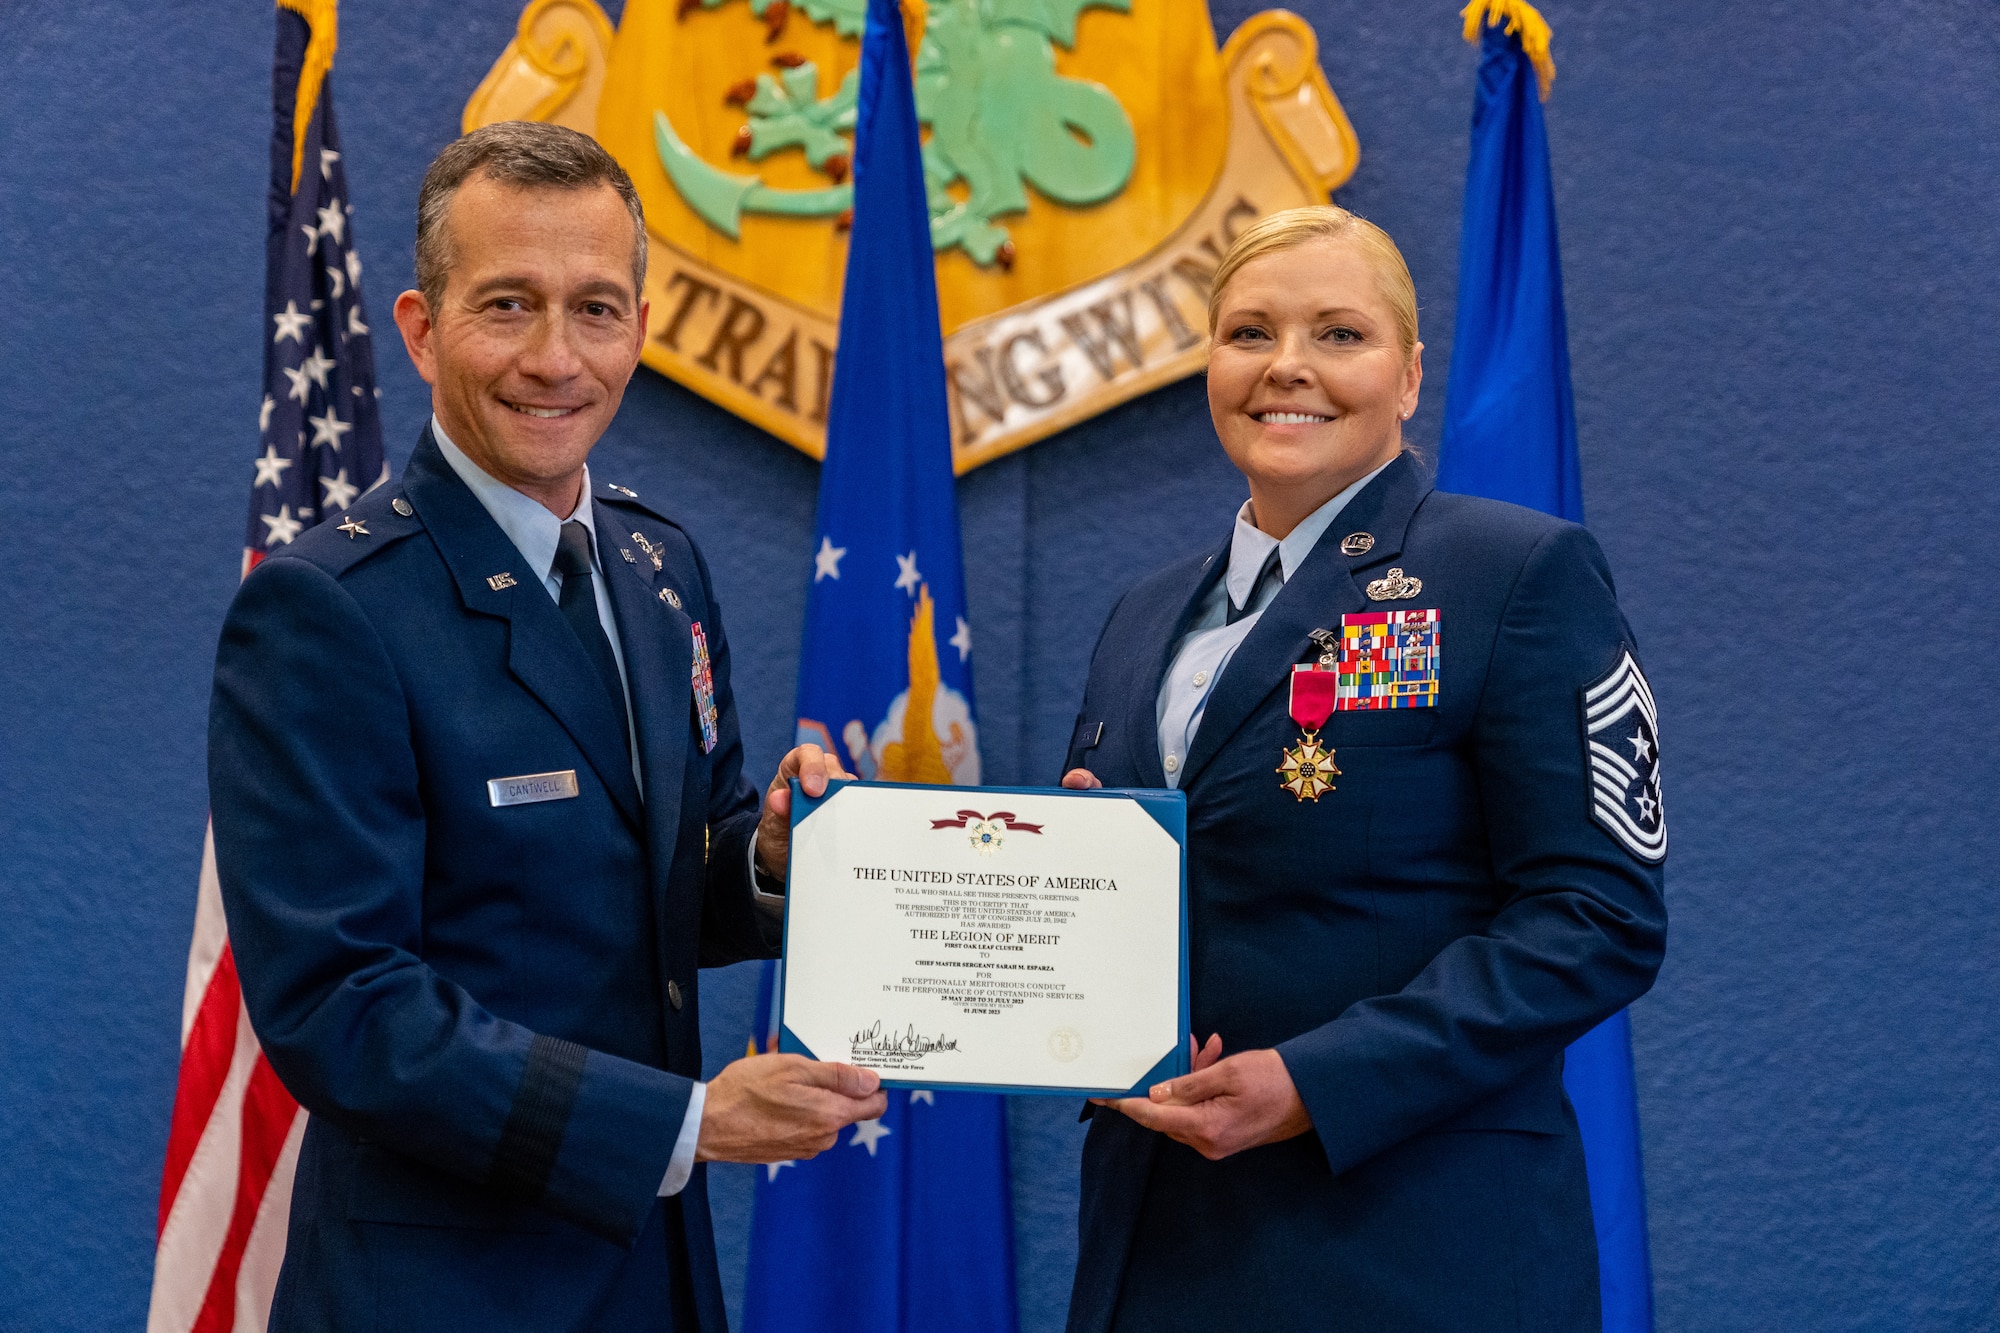 U.S. Air Force Brig. Gen. Houston Cantwell, Jeanne M. Holm Center for Oﬃcer Accessions and Citizen Development commander, and Chief Master Sgt. Sarah Esparza, 81st Training Wing command chief master sergeant, pose with her Legion of Merit certificate during her retirement ceremony at Keesler Air Force Base, Mississippi, June 1, 2023.